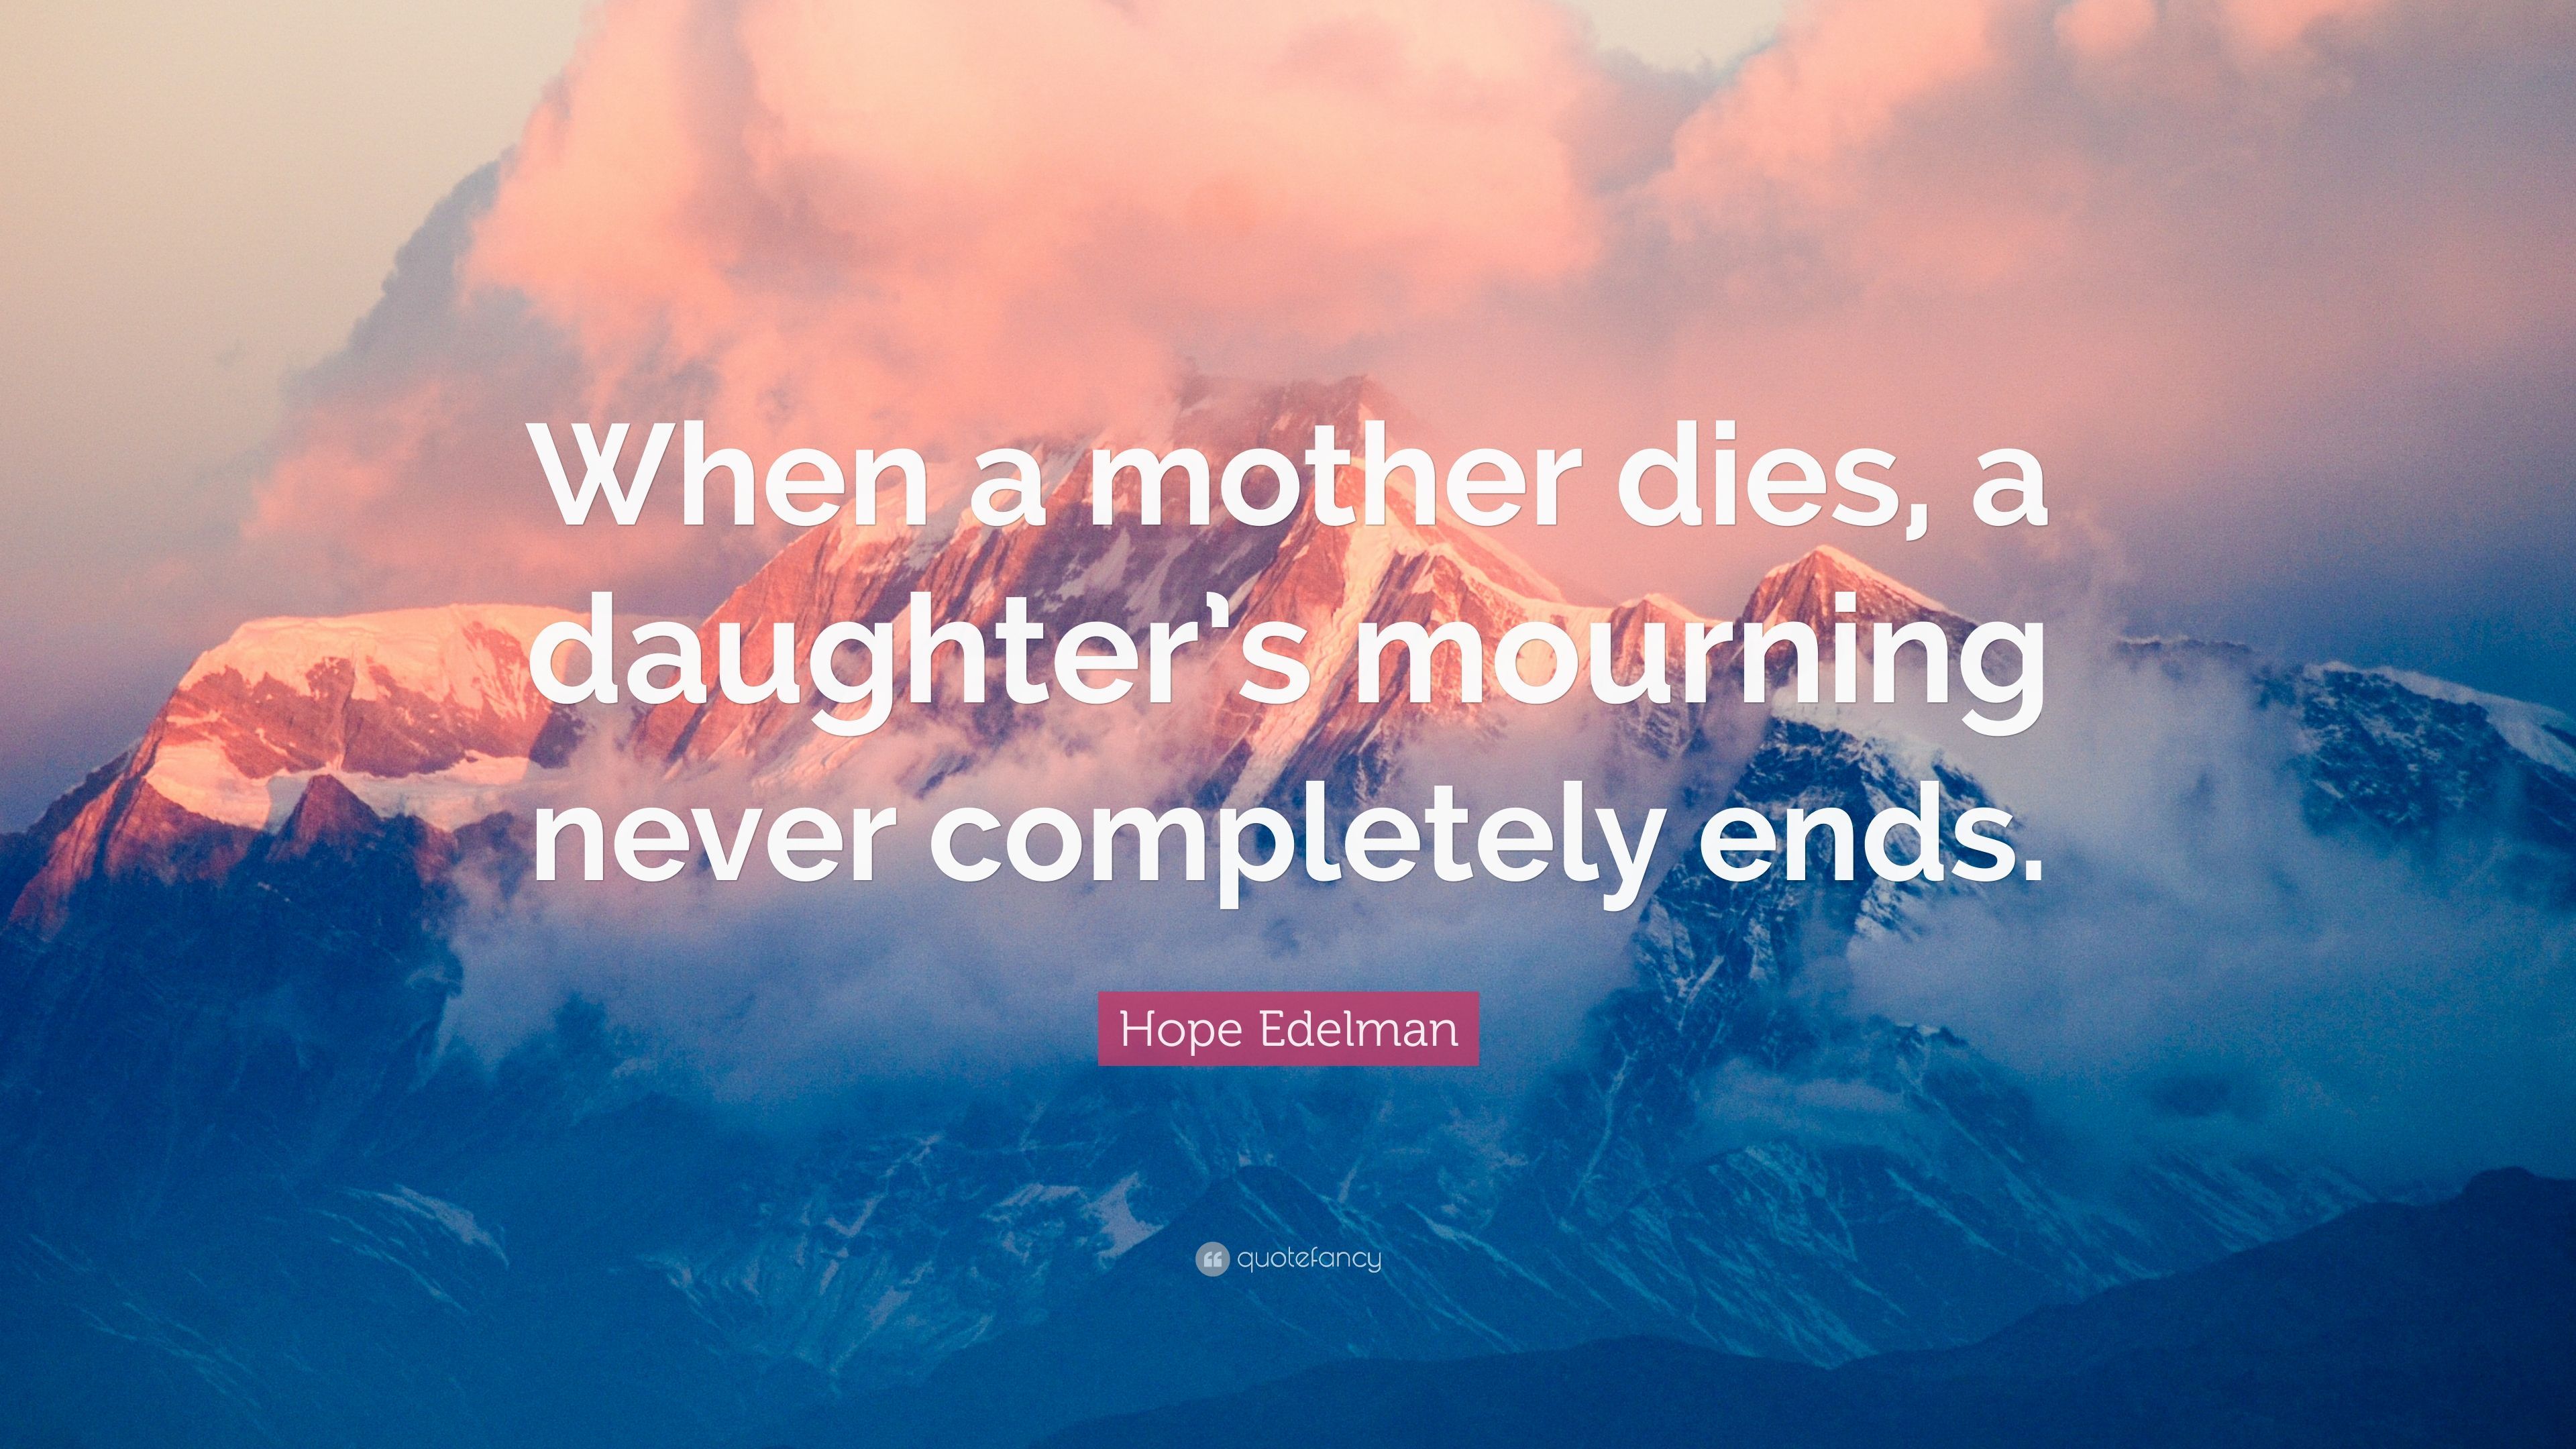 Hope Edelman Quote: “When a mother dies, a daughter's mourning